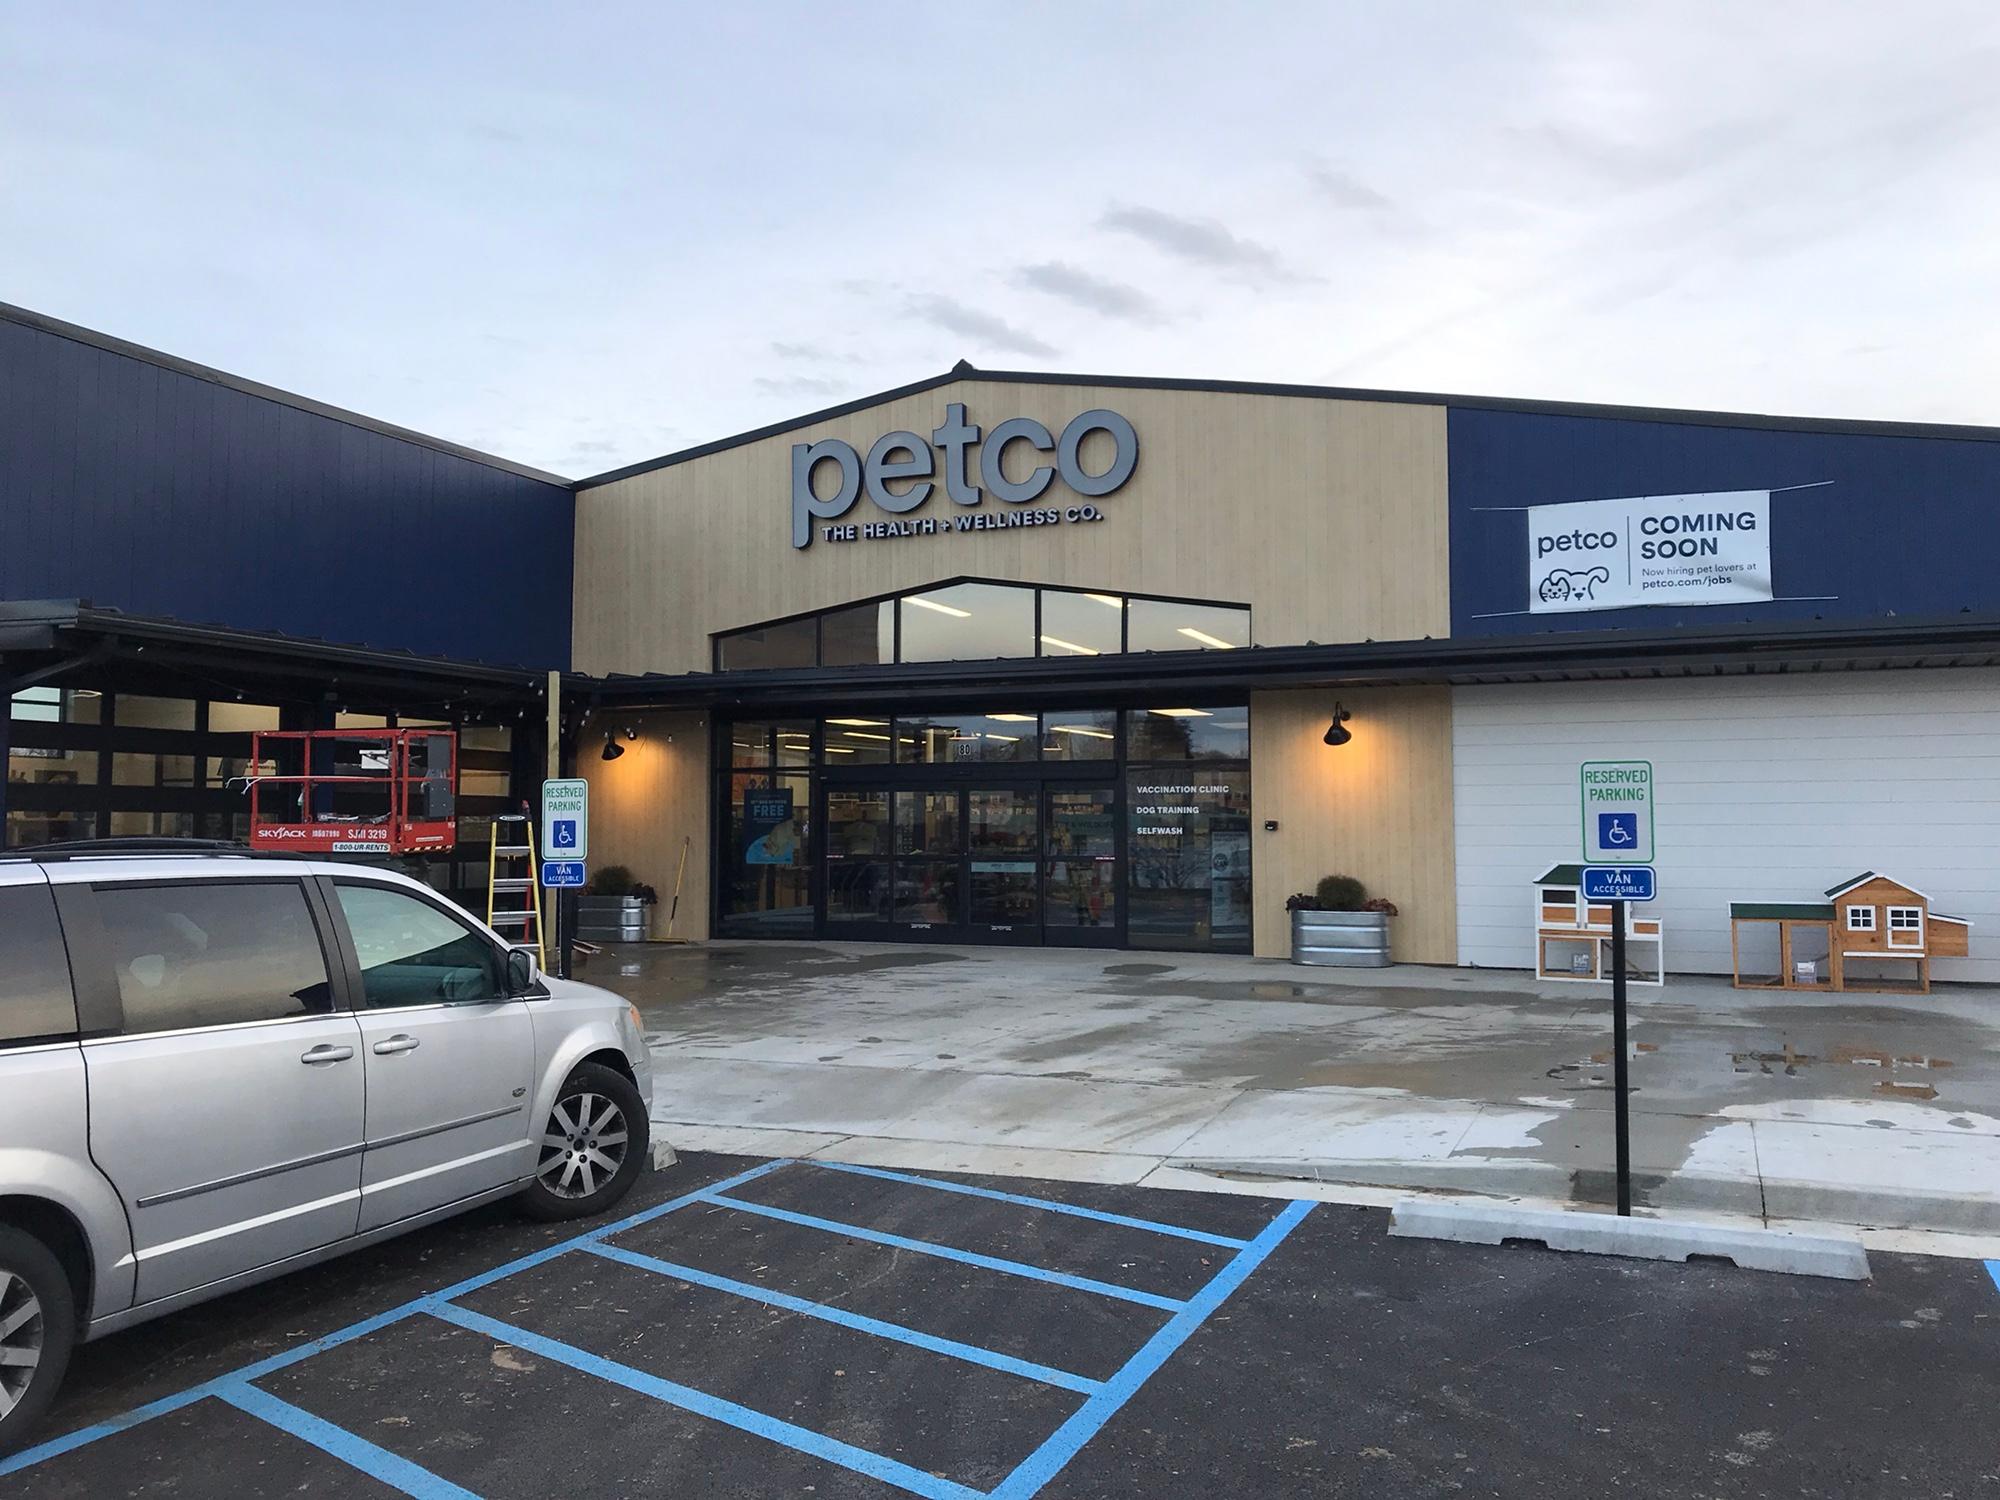 Exterior of Petco pet store in Mount Sterling, KY.